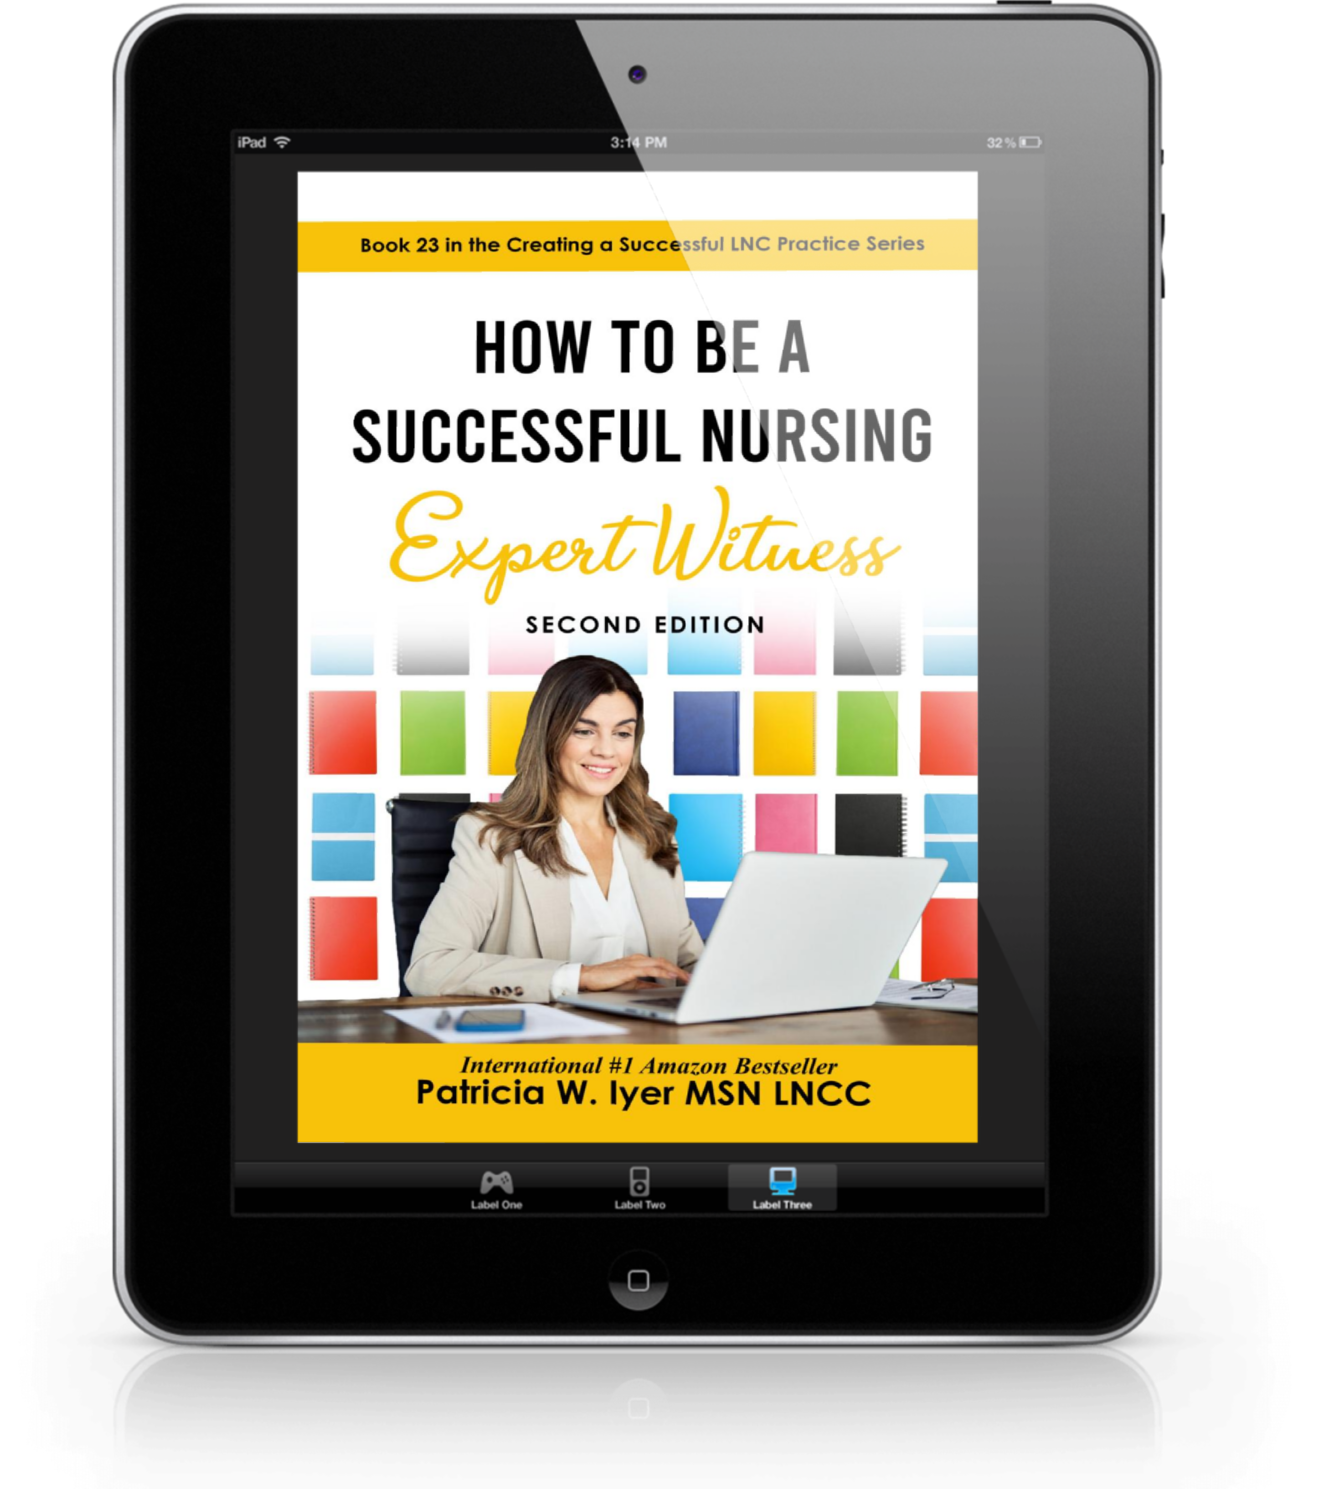 digital book cover called How to be a Successful Expert Witness 2nd Edition